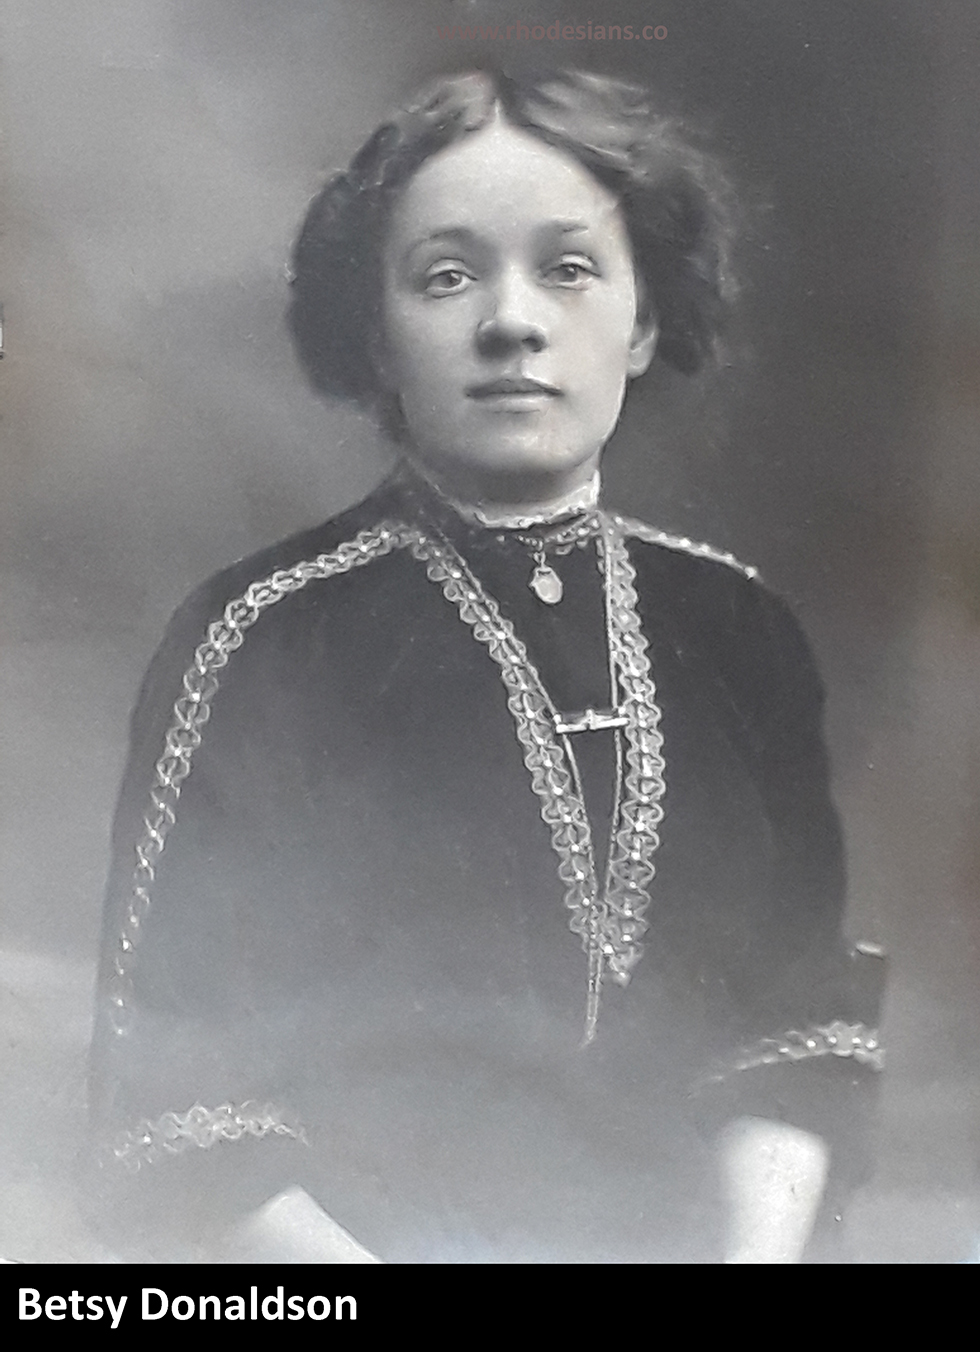 Portrait of Betsy Donaldson who married William Ritchie